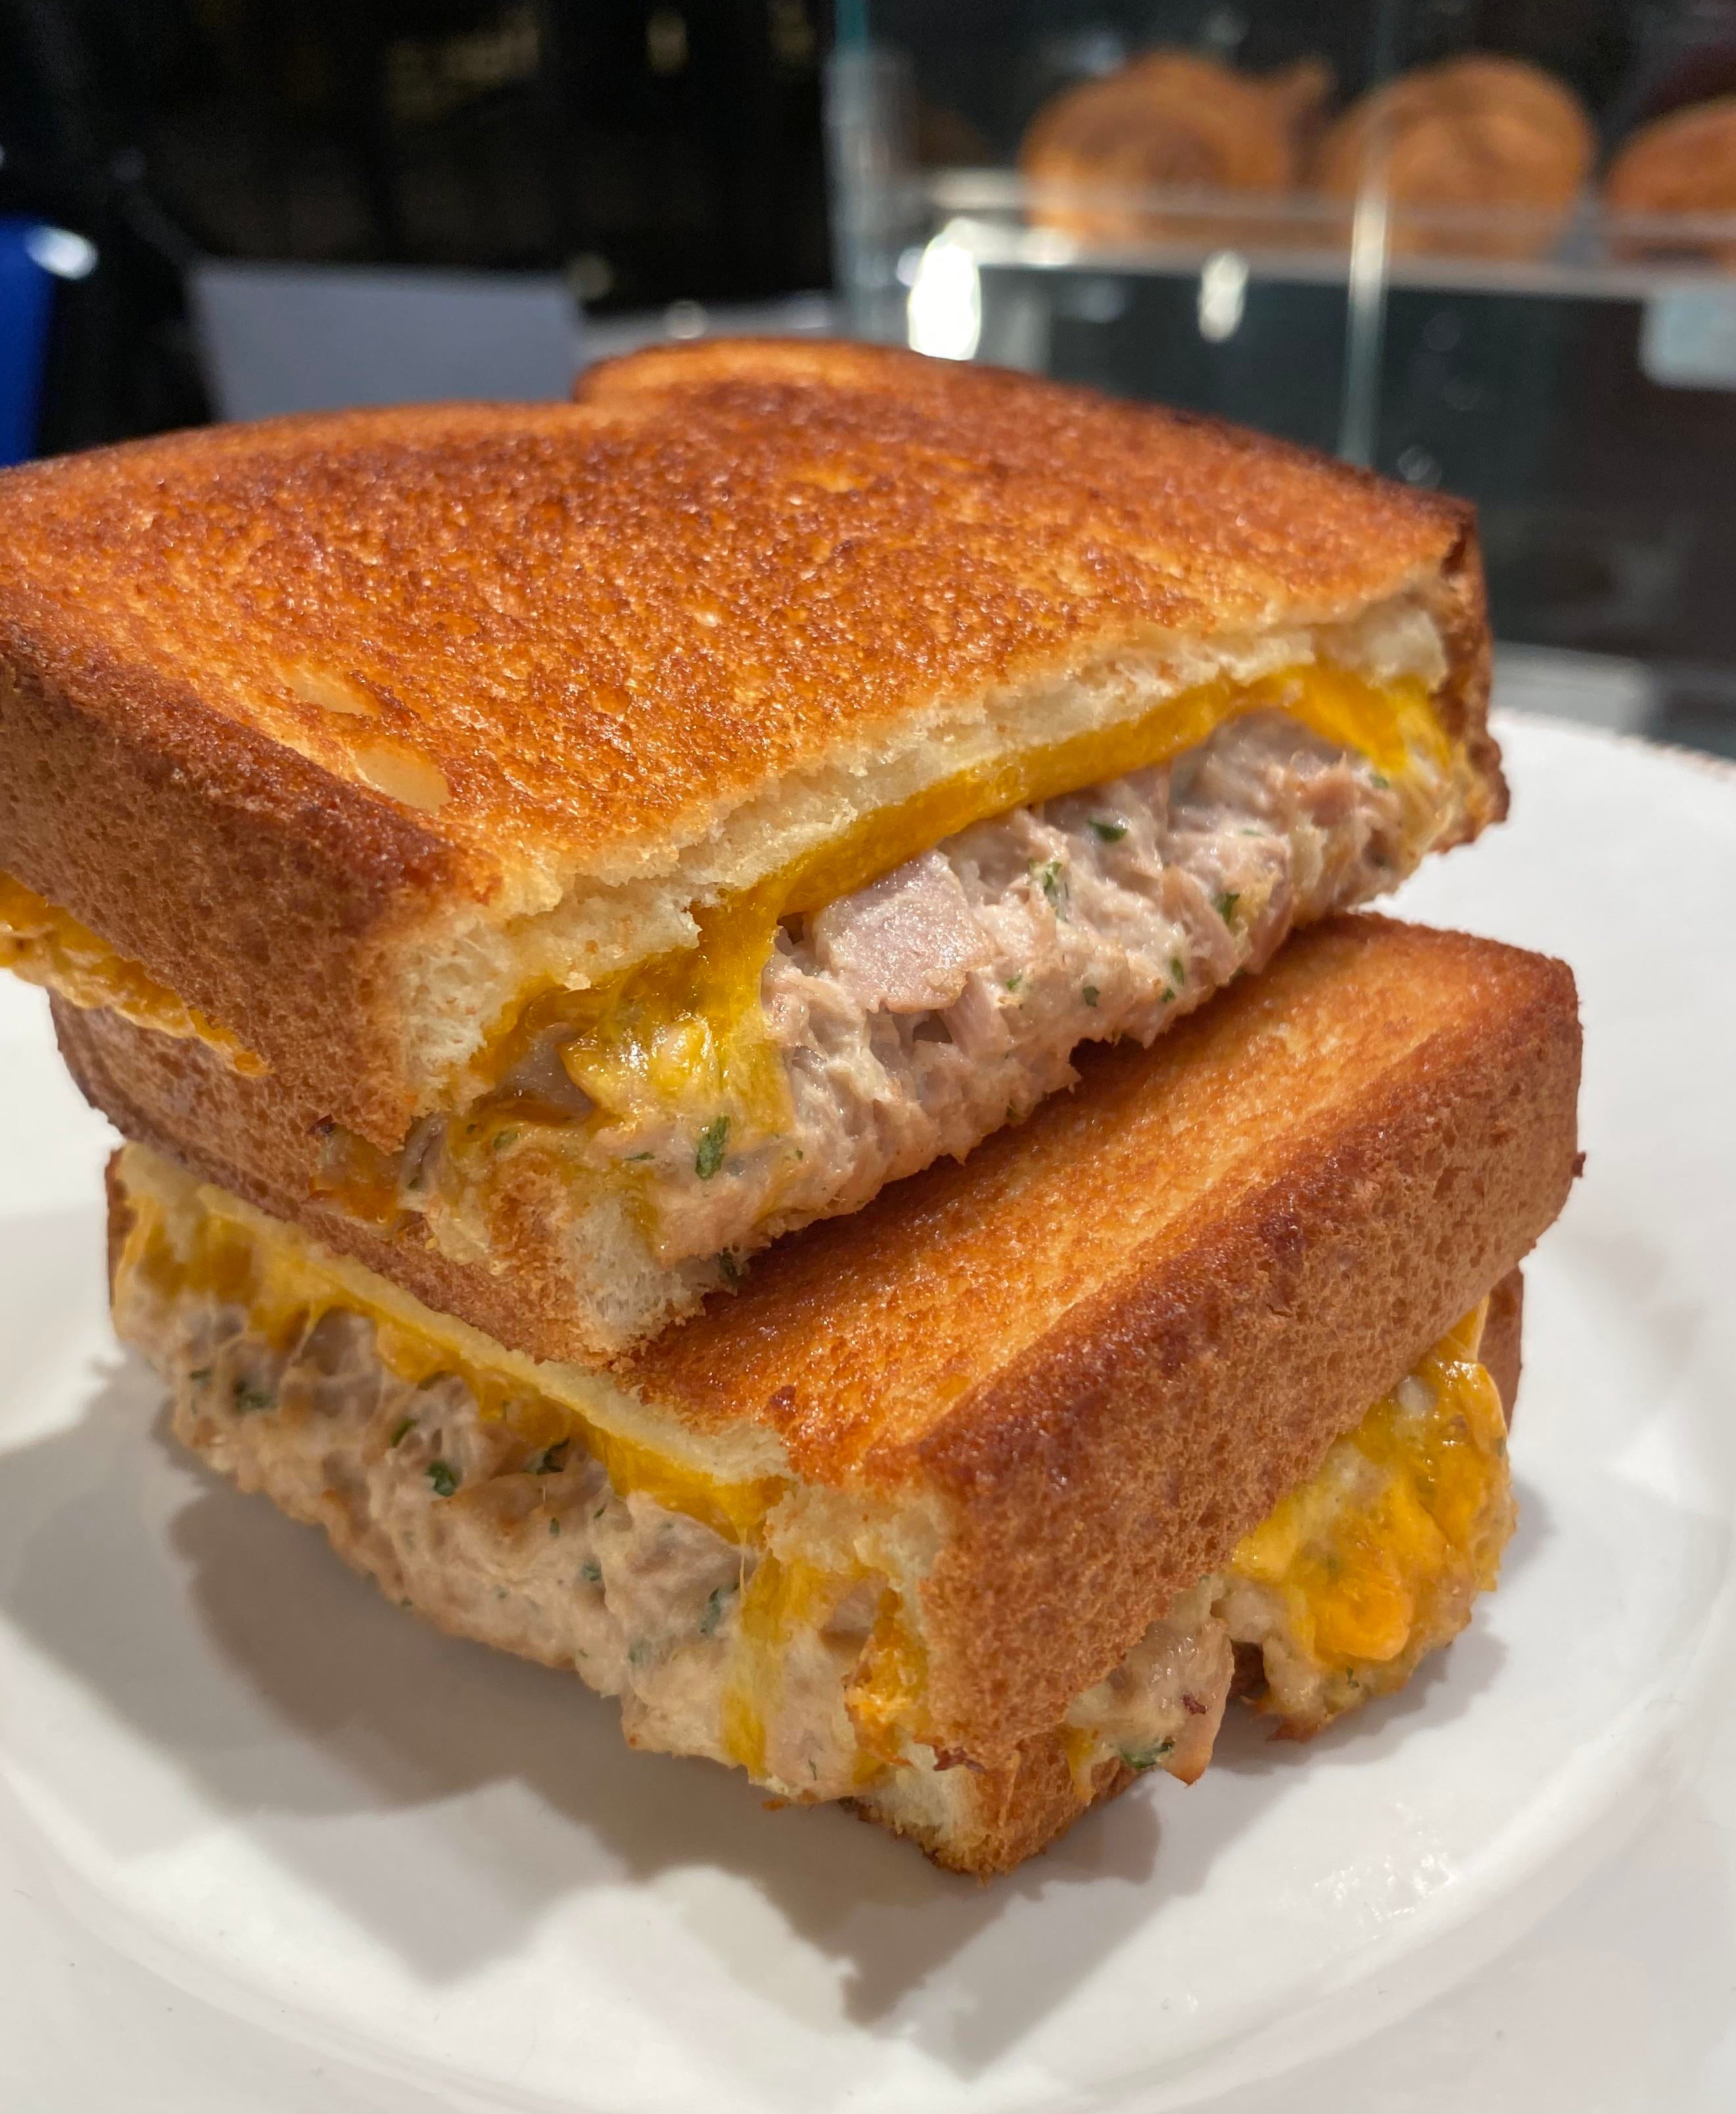 A tuna melt sandwich on a plate with a crispy crust and melted cheese visible